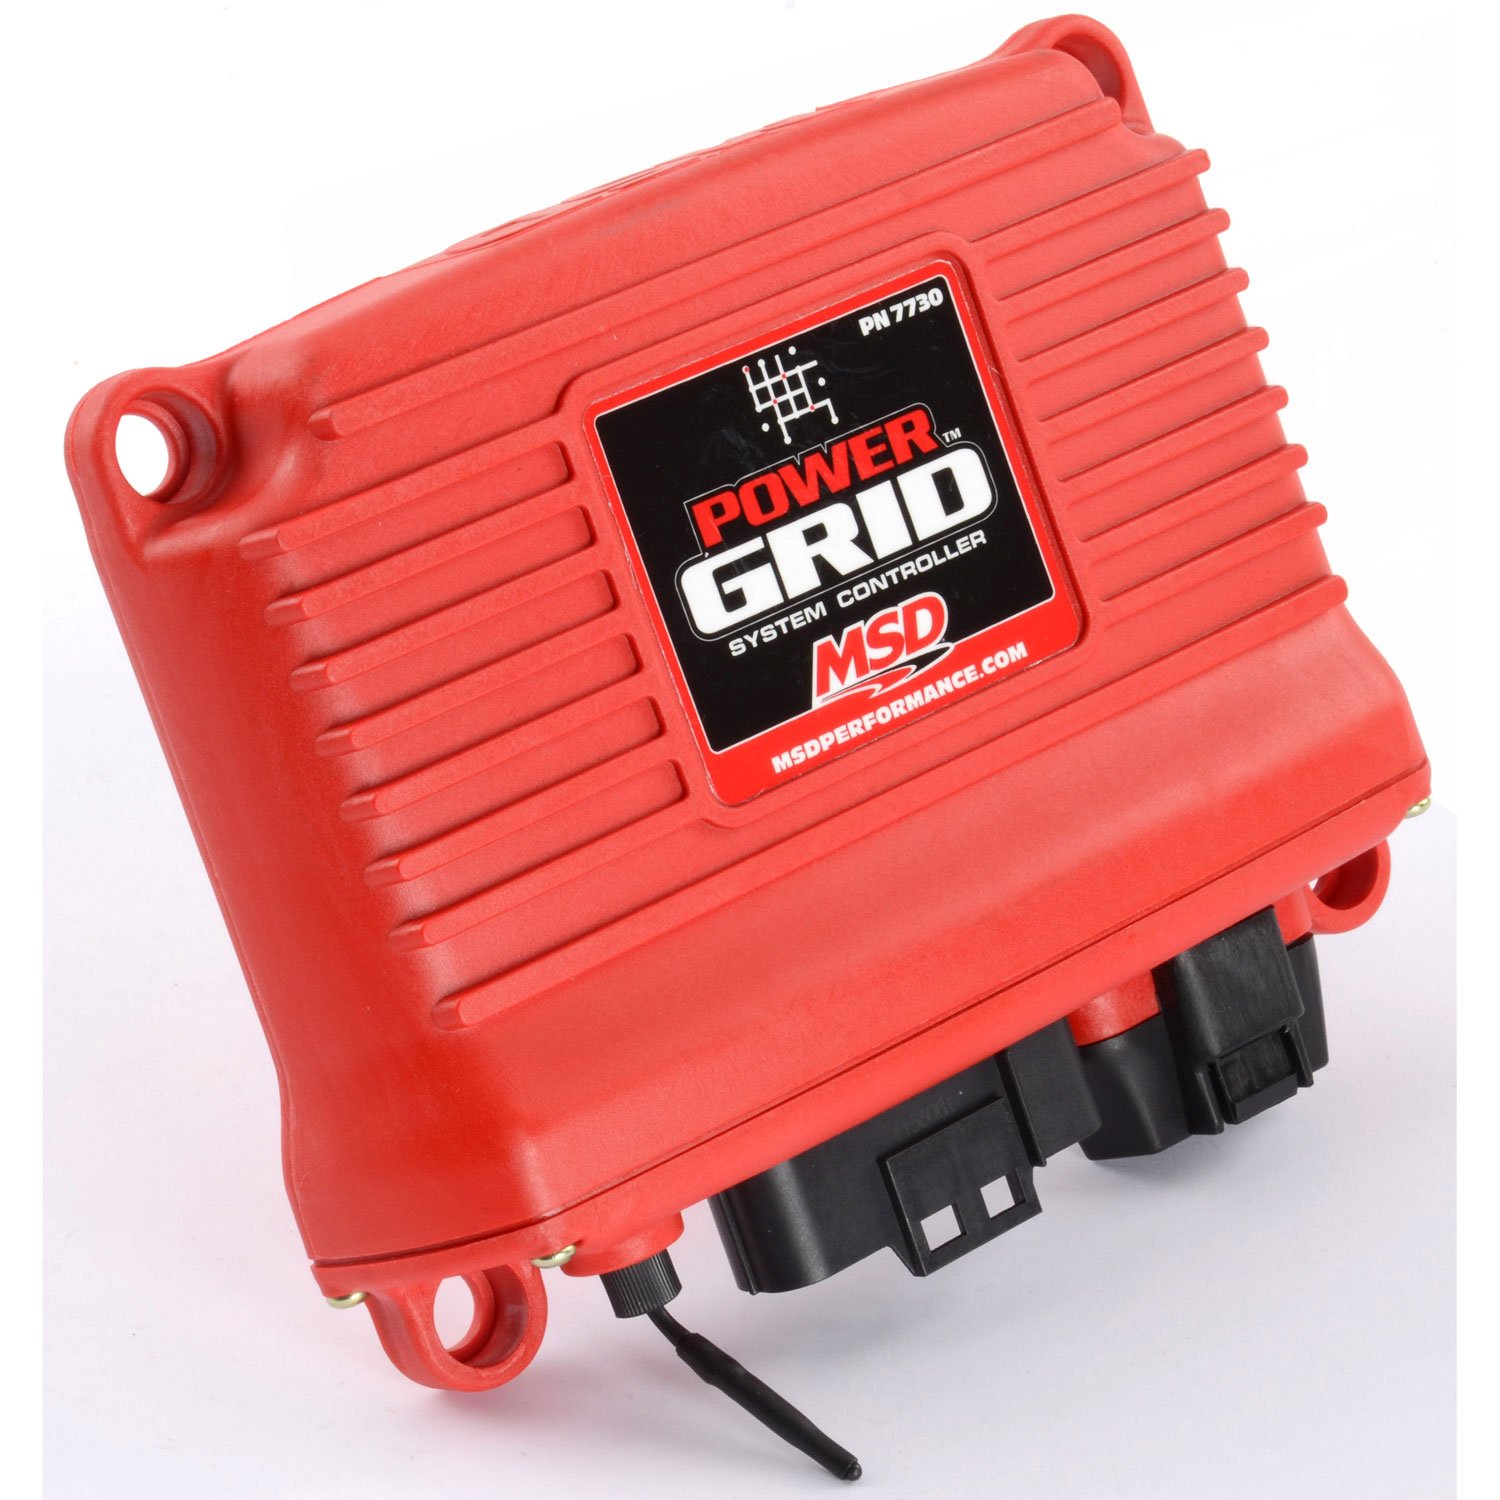 7730 Power Grid Ignition System Controller Red